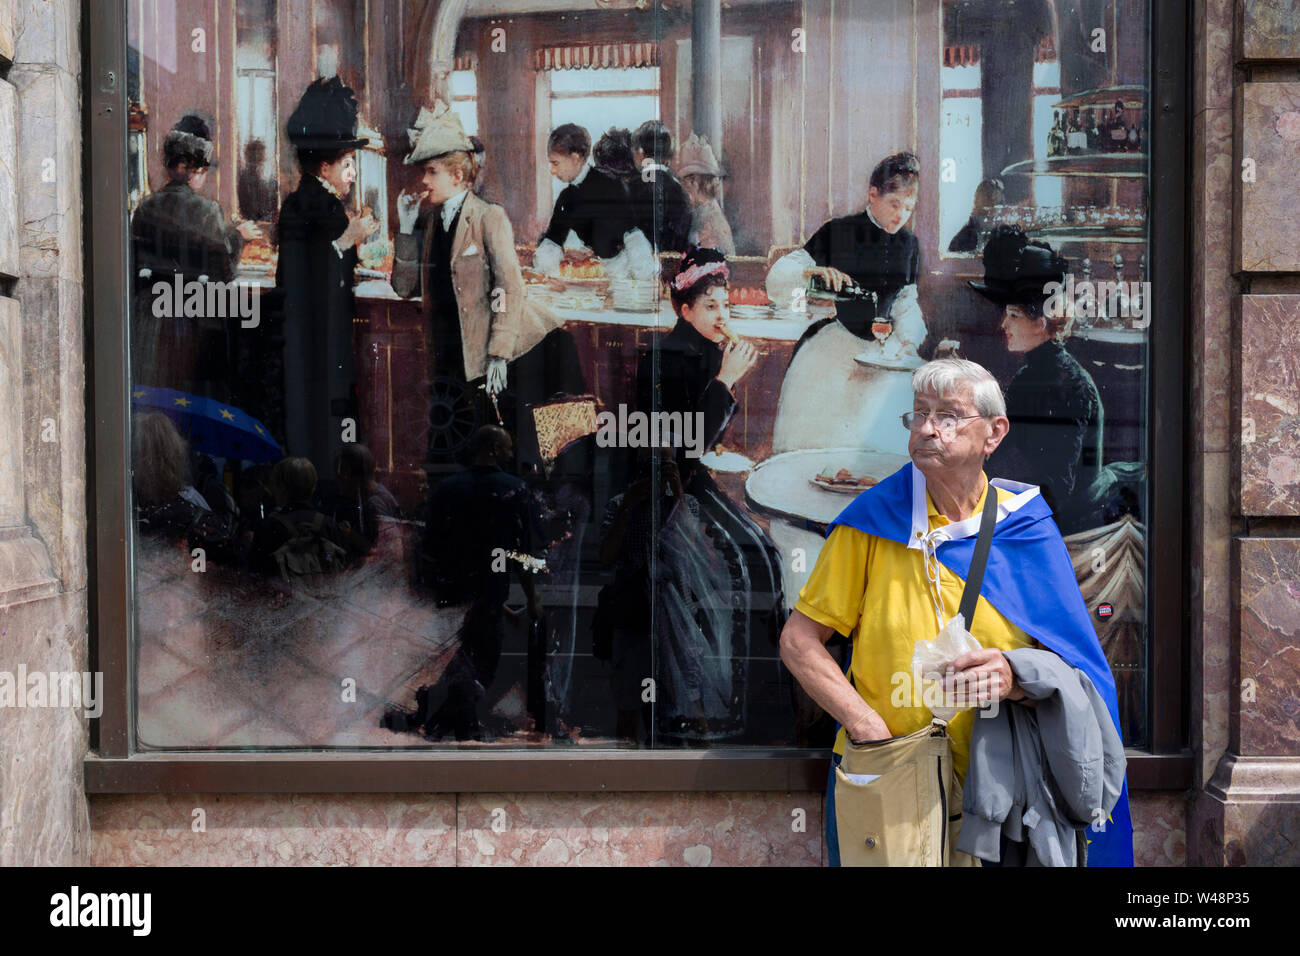 A Brexit protester stops for lunch next to a reproduction of La Patisserie Gloppe by Jean Beraud. Days before the new leader of the Conservative Party and next Prime Minister of the UK is elected by its members (and expected to be Boris Johnson), the last weekend of Theresa May's unsuccessful Brexit from the European Union saw a March for Change protest with pro-EU Remainers marching through the capital demanding an end to Brexit and a No to a Johnson PM, on 20th July 2019, in London, England. Stock Photo